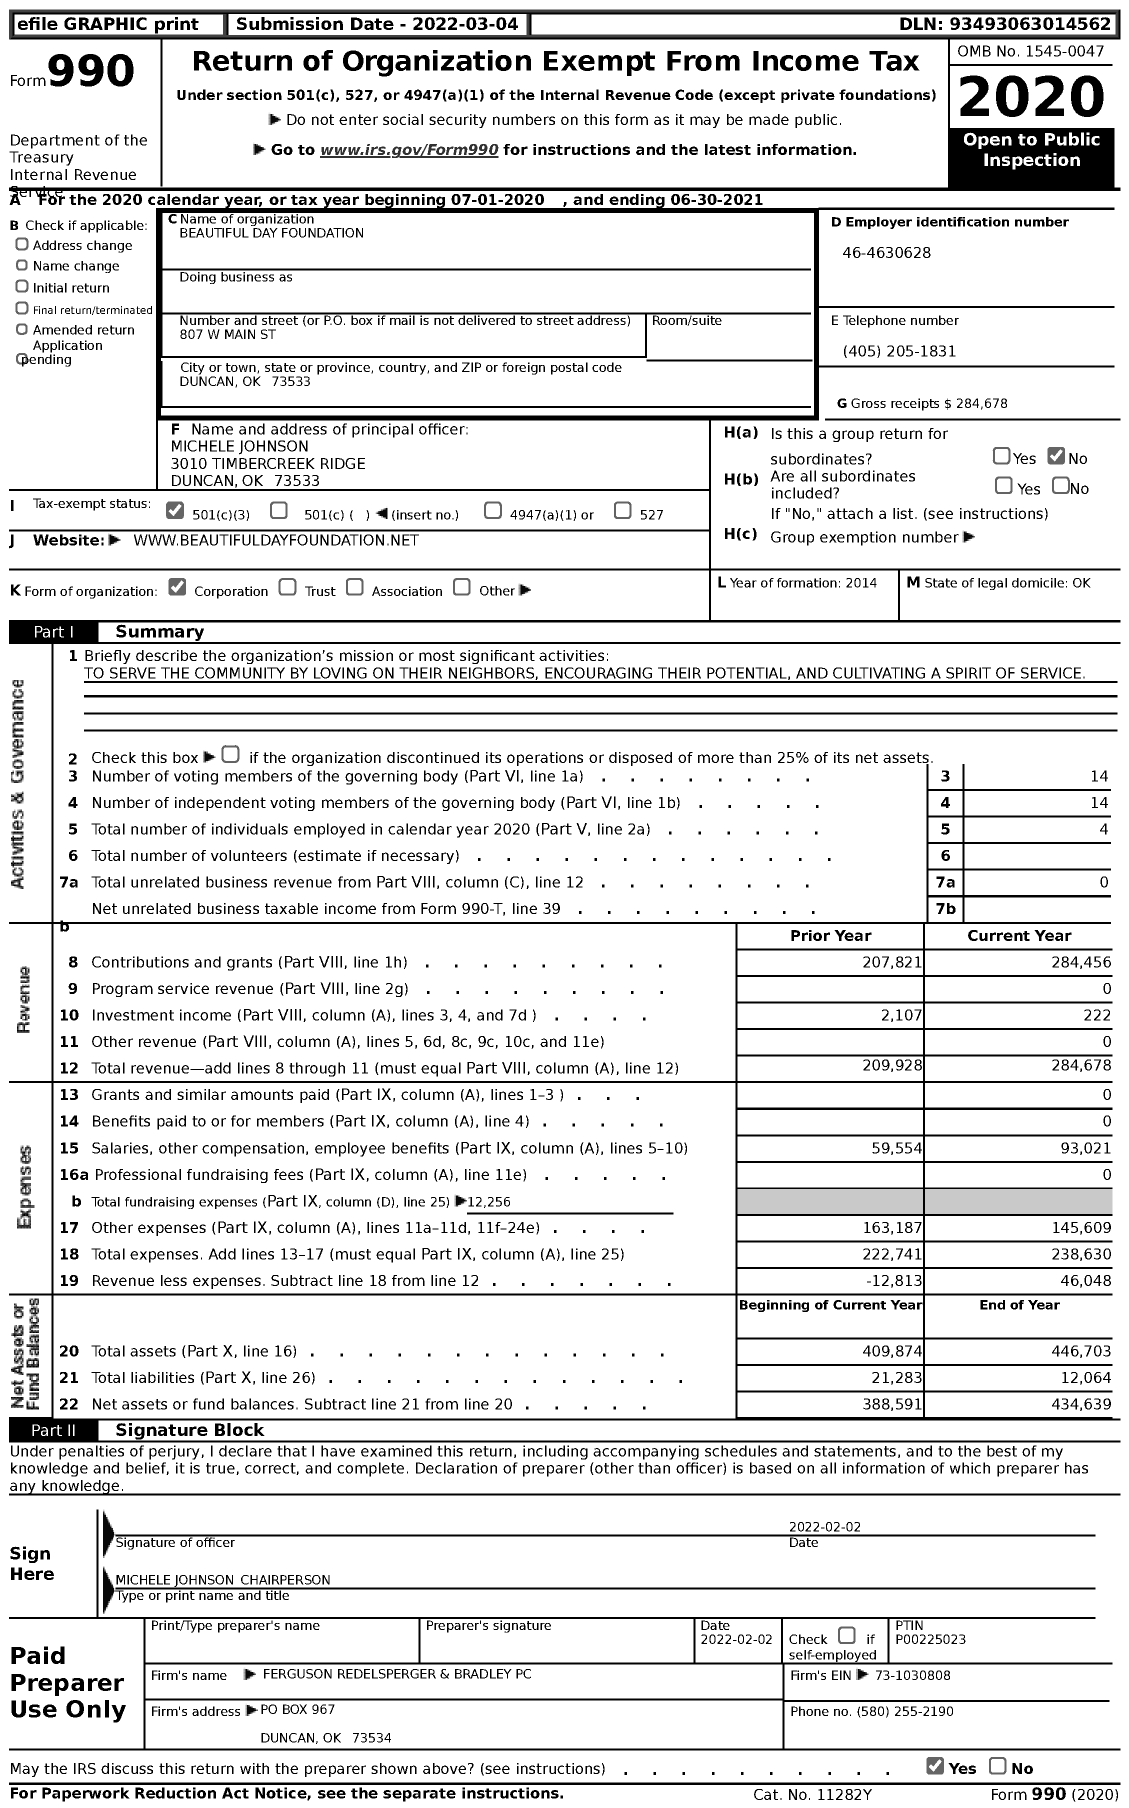 Image of first page of 2020 Form 990 for Beautiful Day Foundation